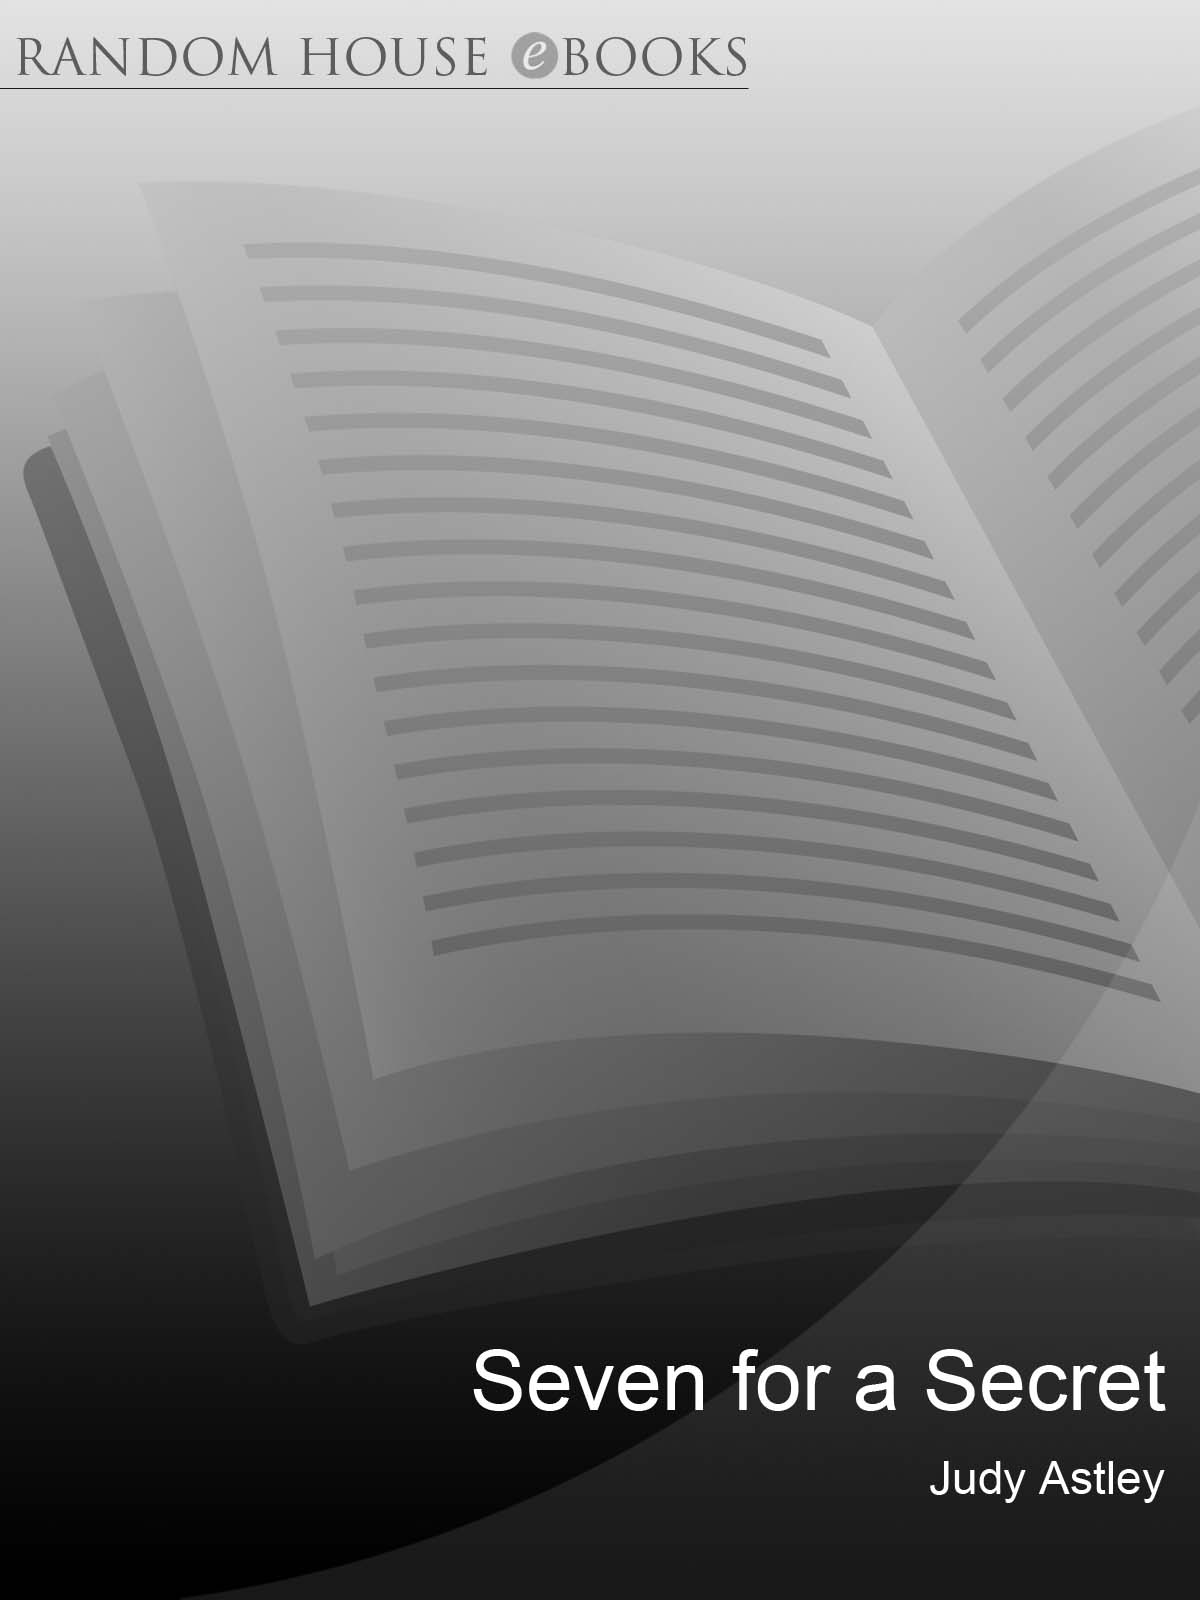 Seven For a Secret (1996) by Judy Astley